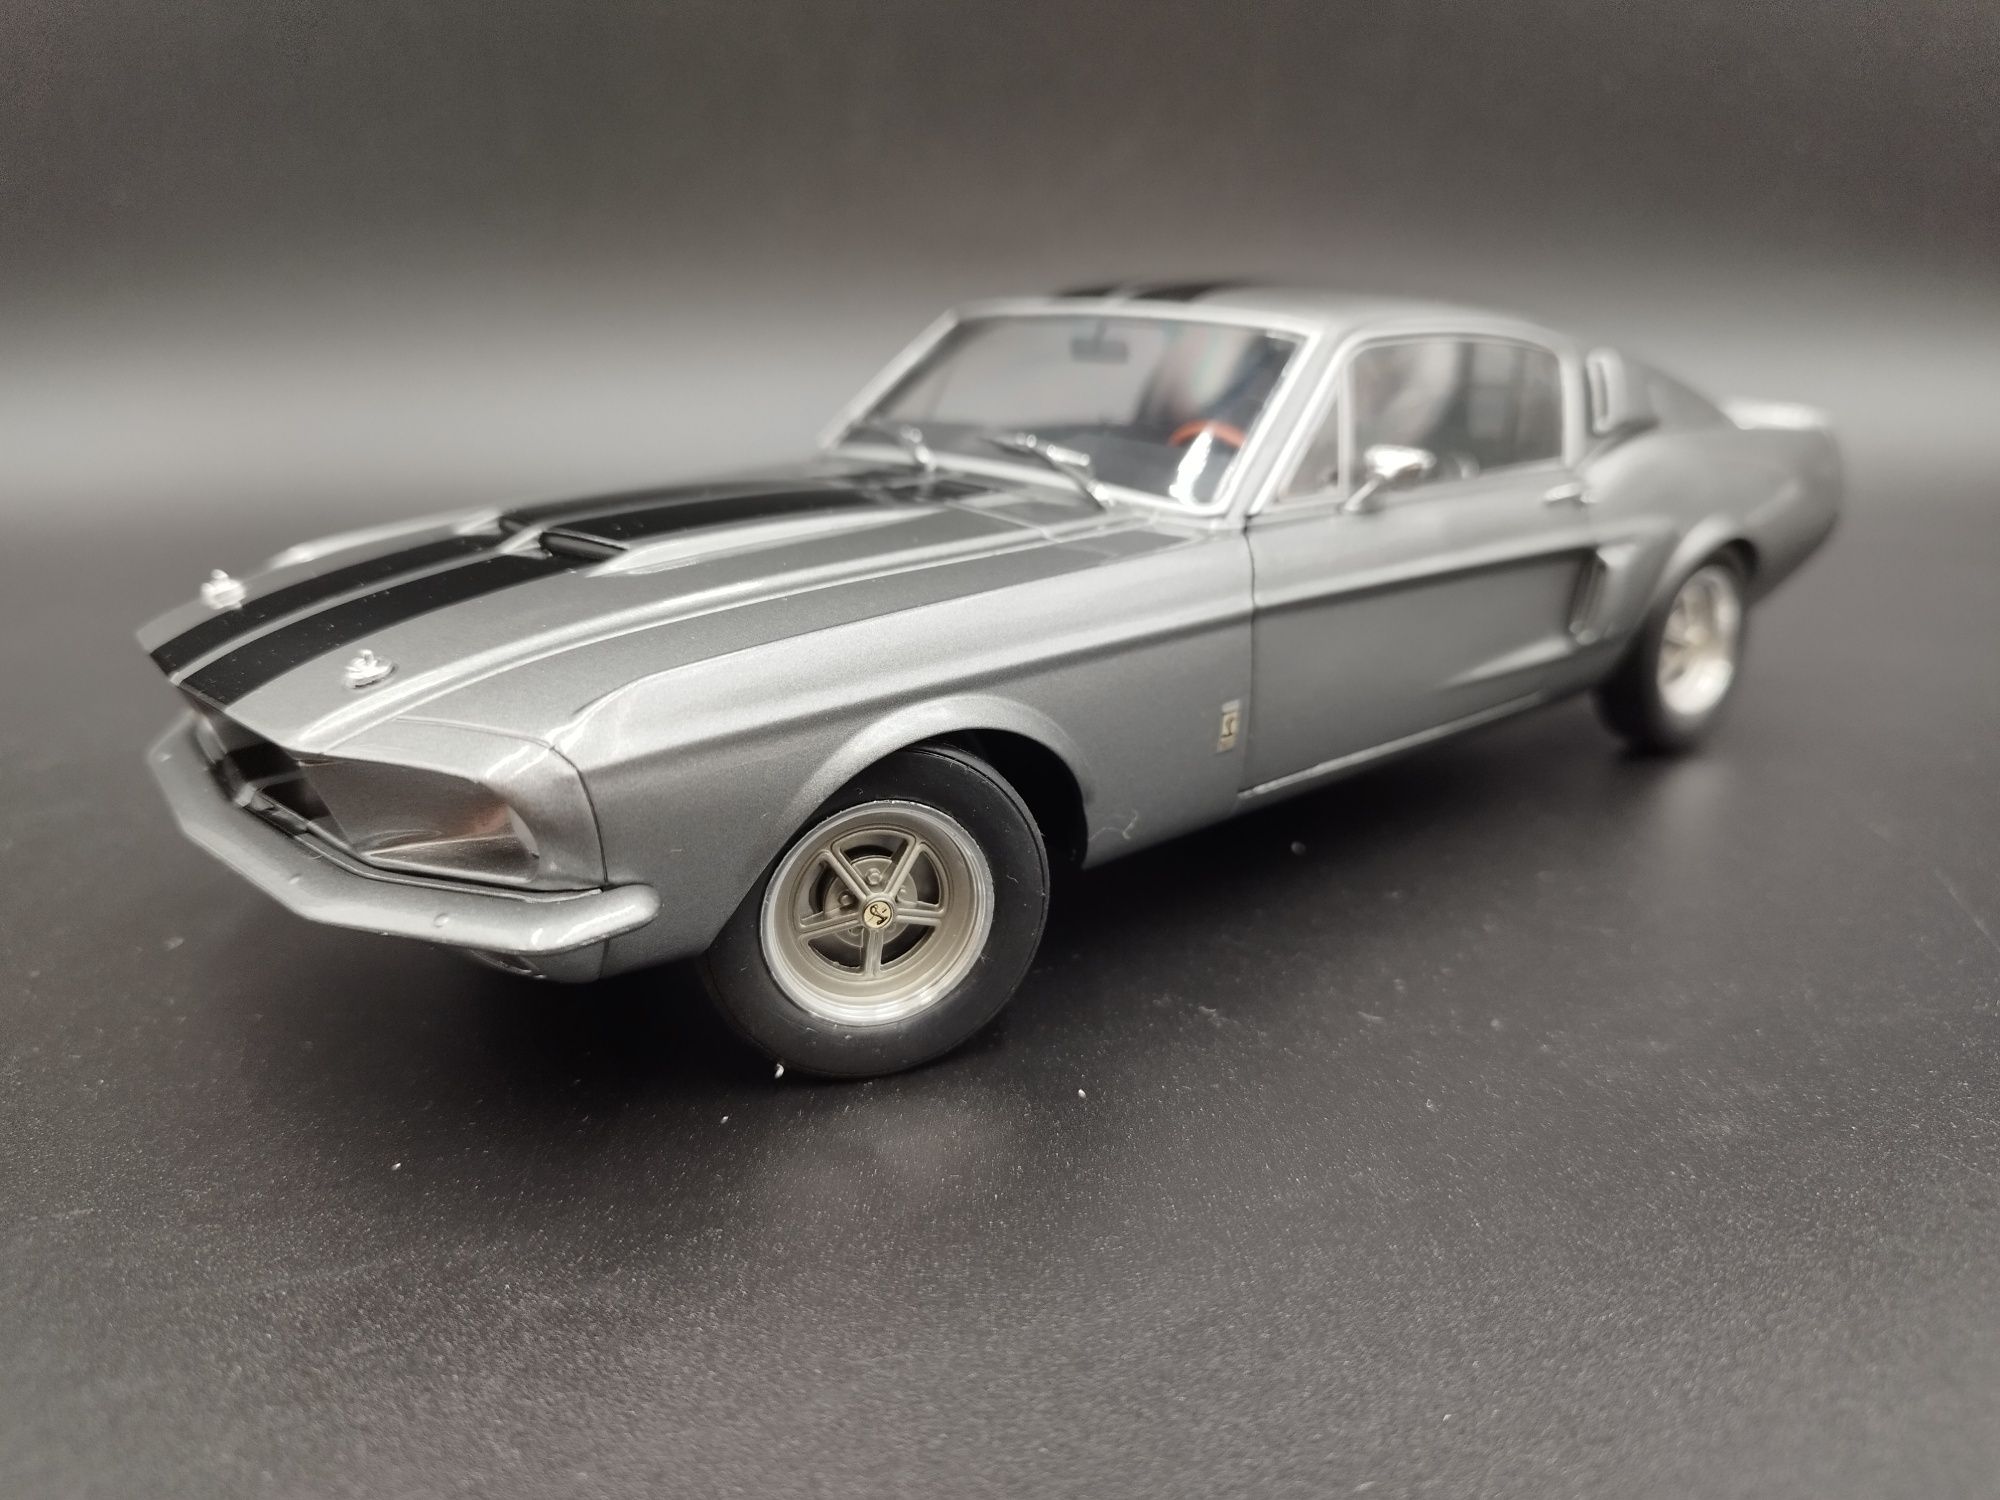 1:18 SolidoFord Mustang GT 500 Shelby Model nowy